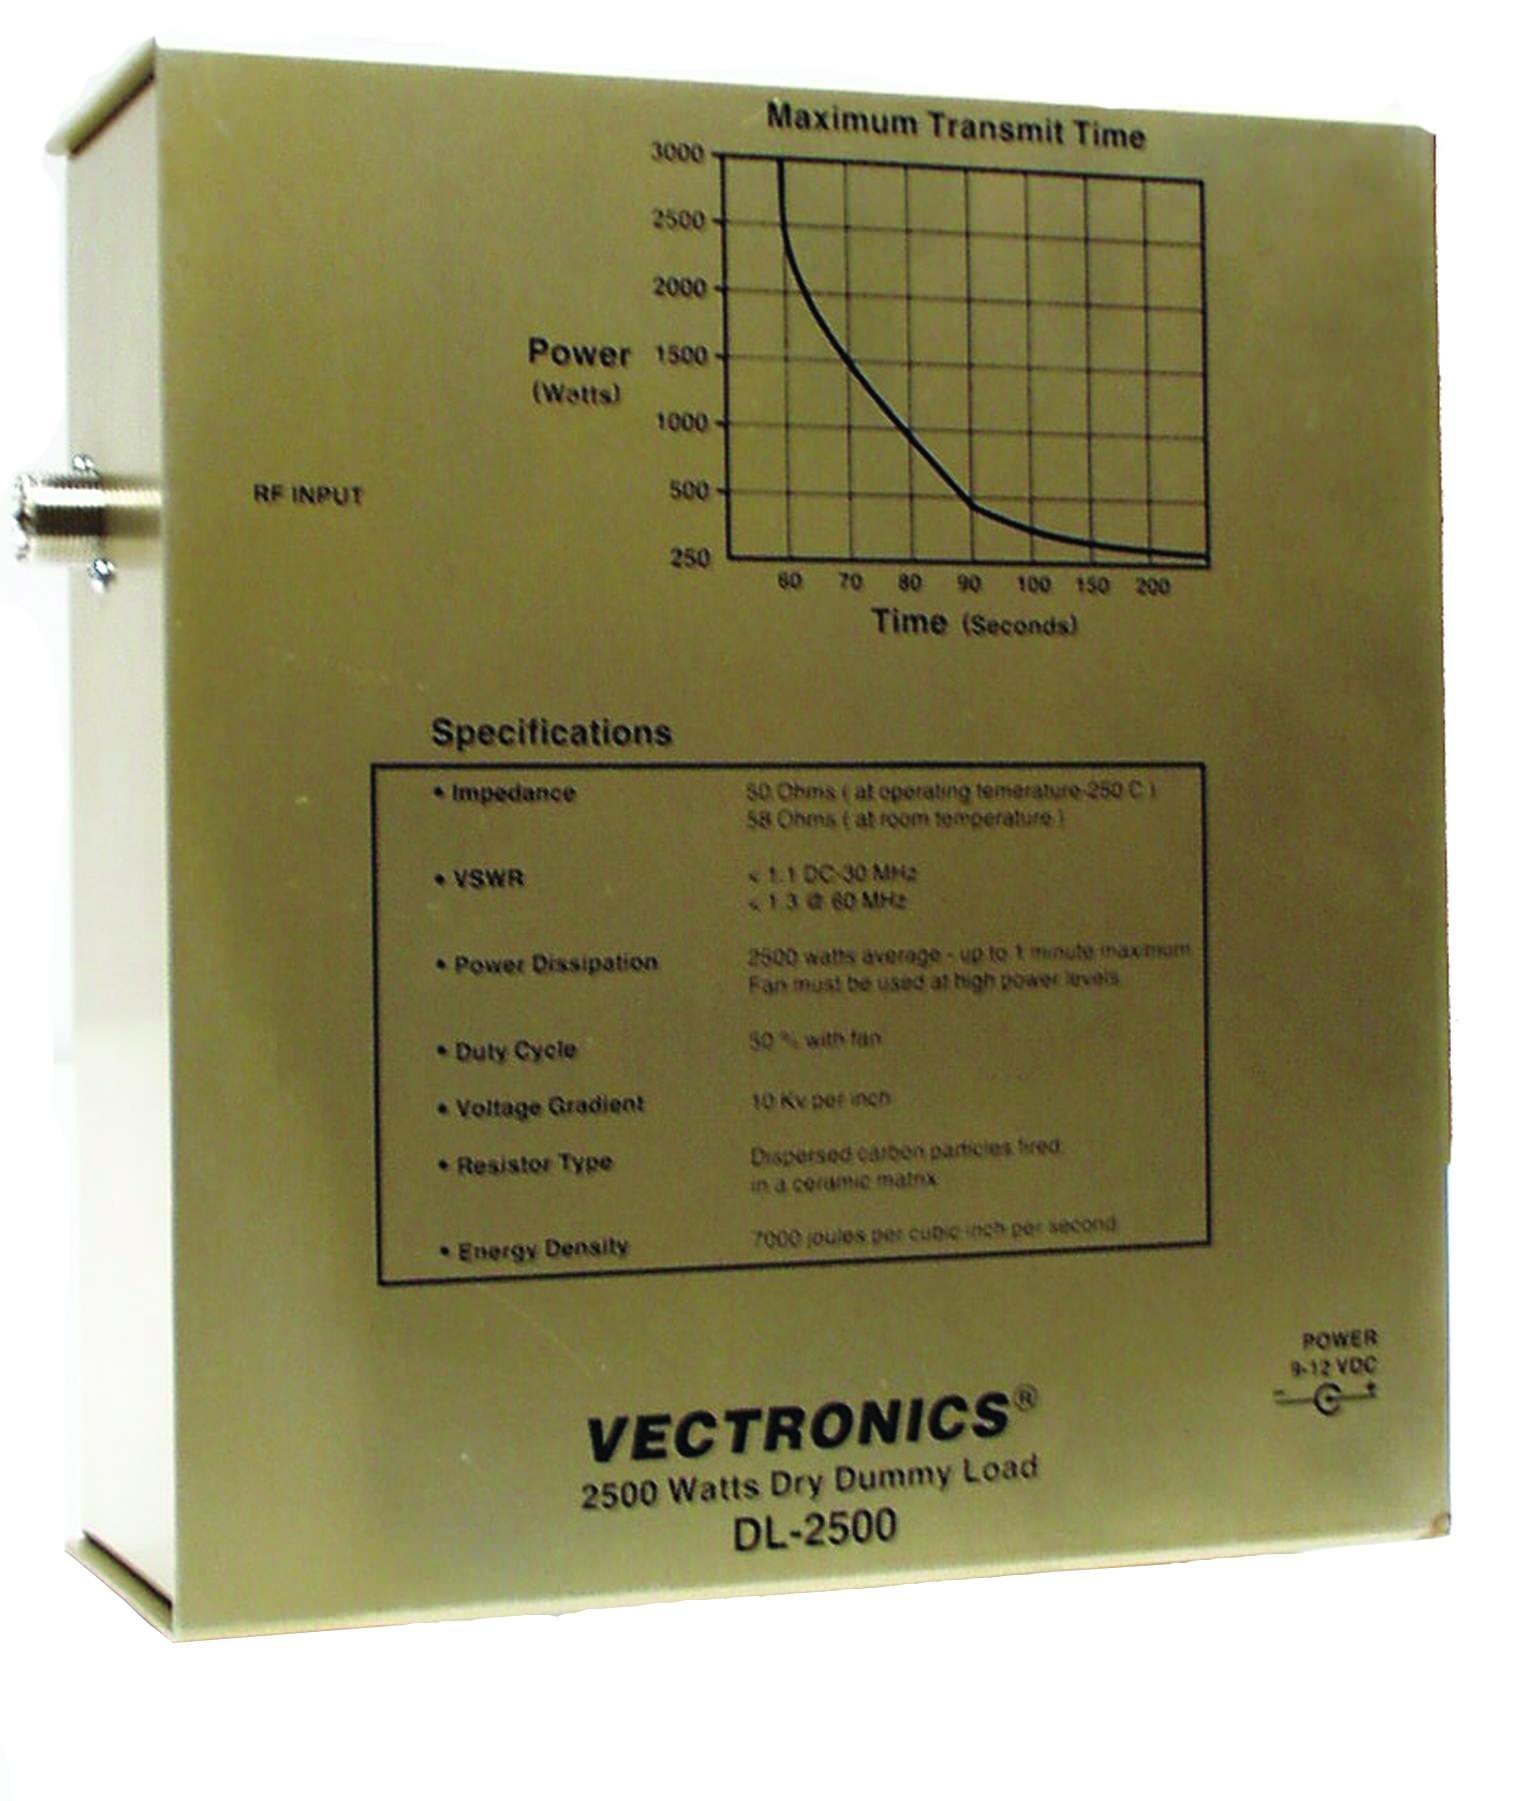 DL-2500 Vectronics 2.5kW Dummy Load (SO-239)